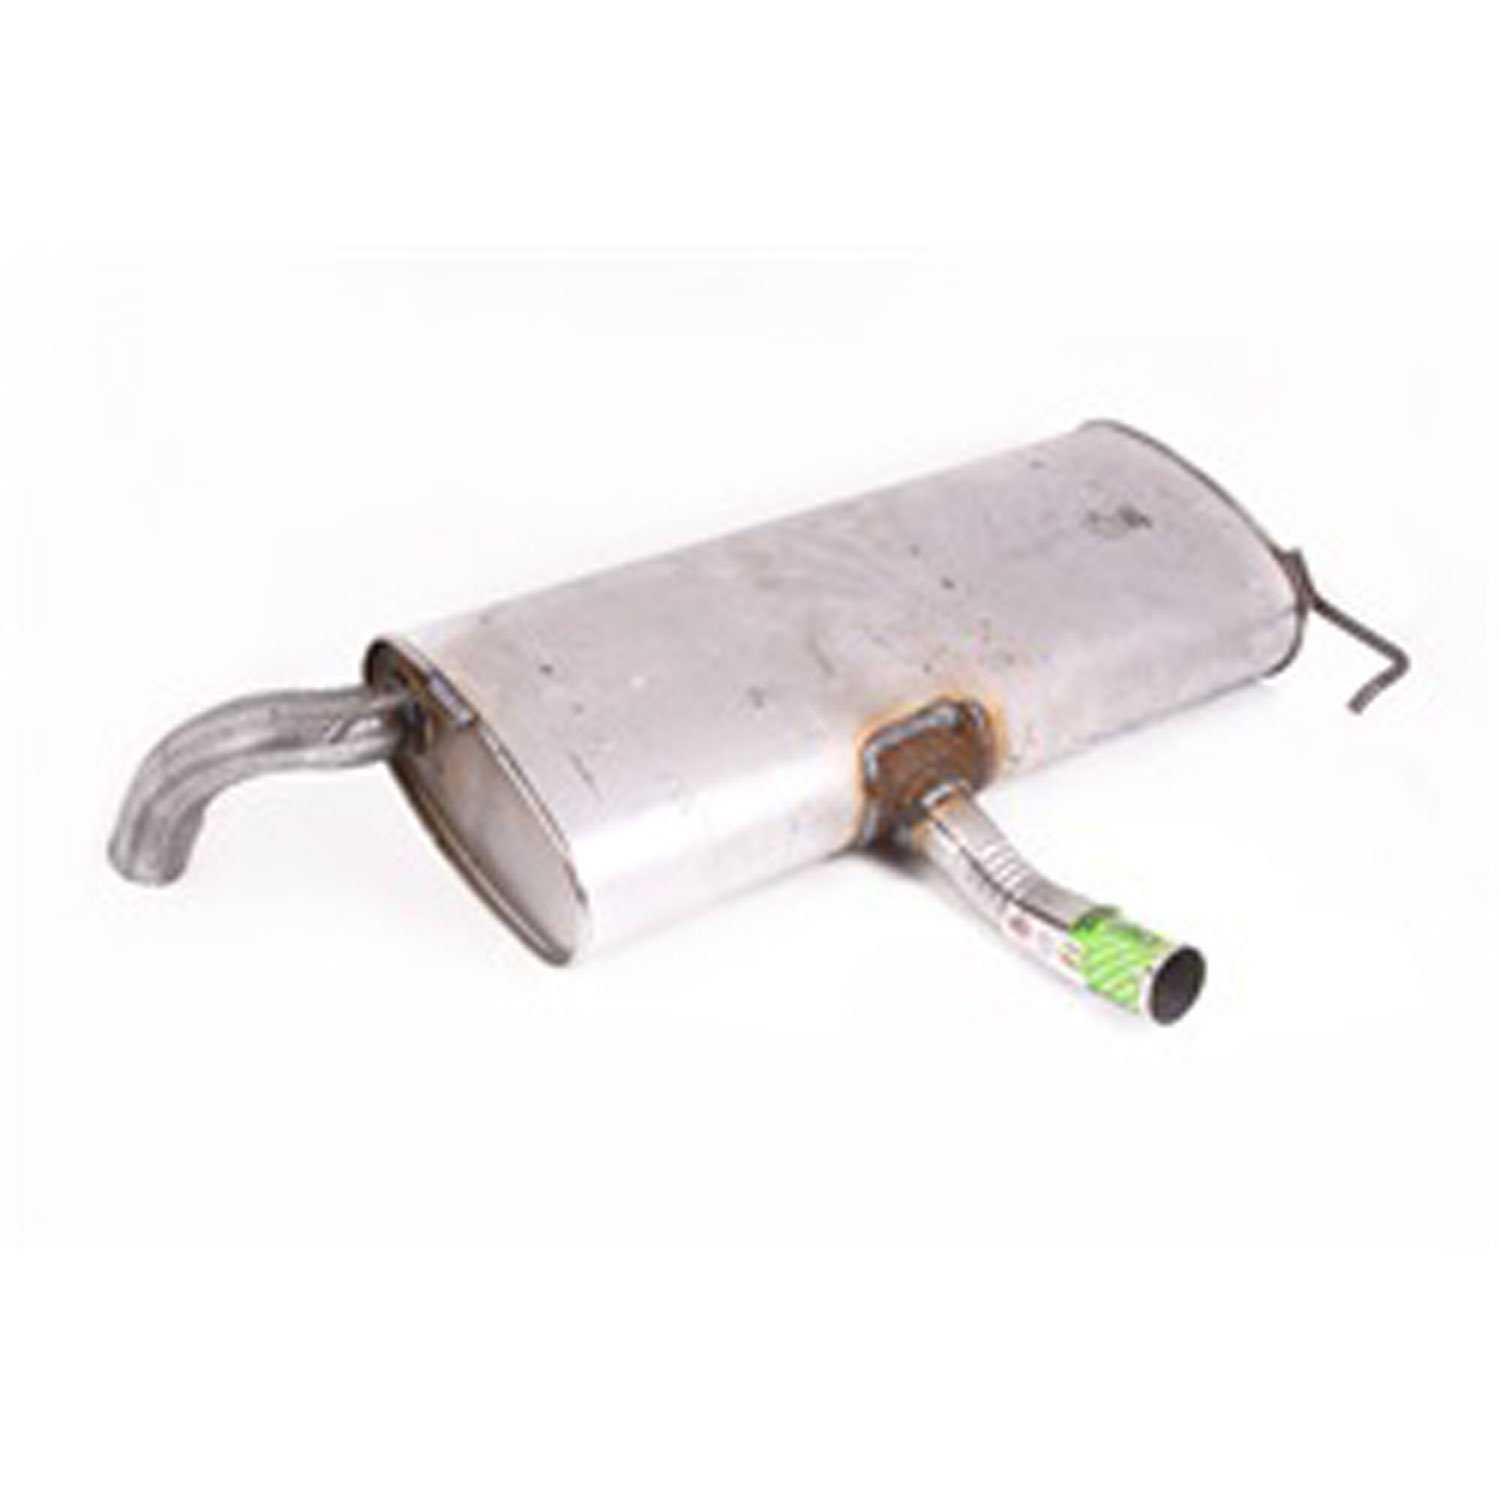 Replacement muffler from Omix-ADA, Fits 07-10 Jeep Compass